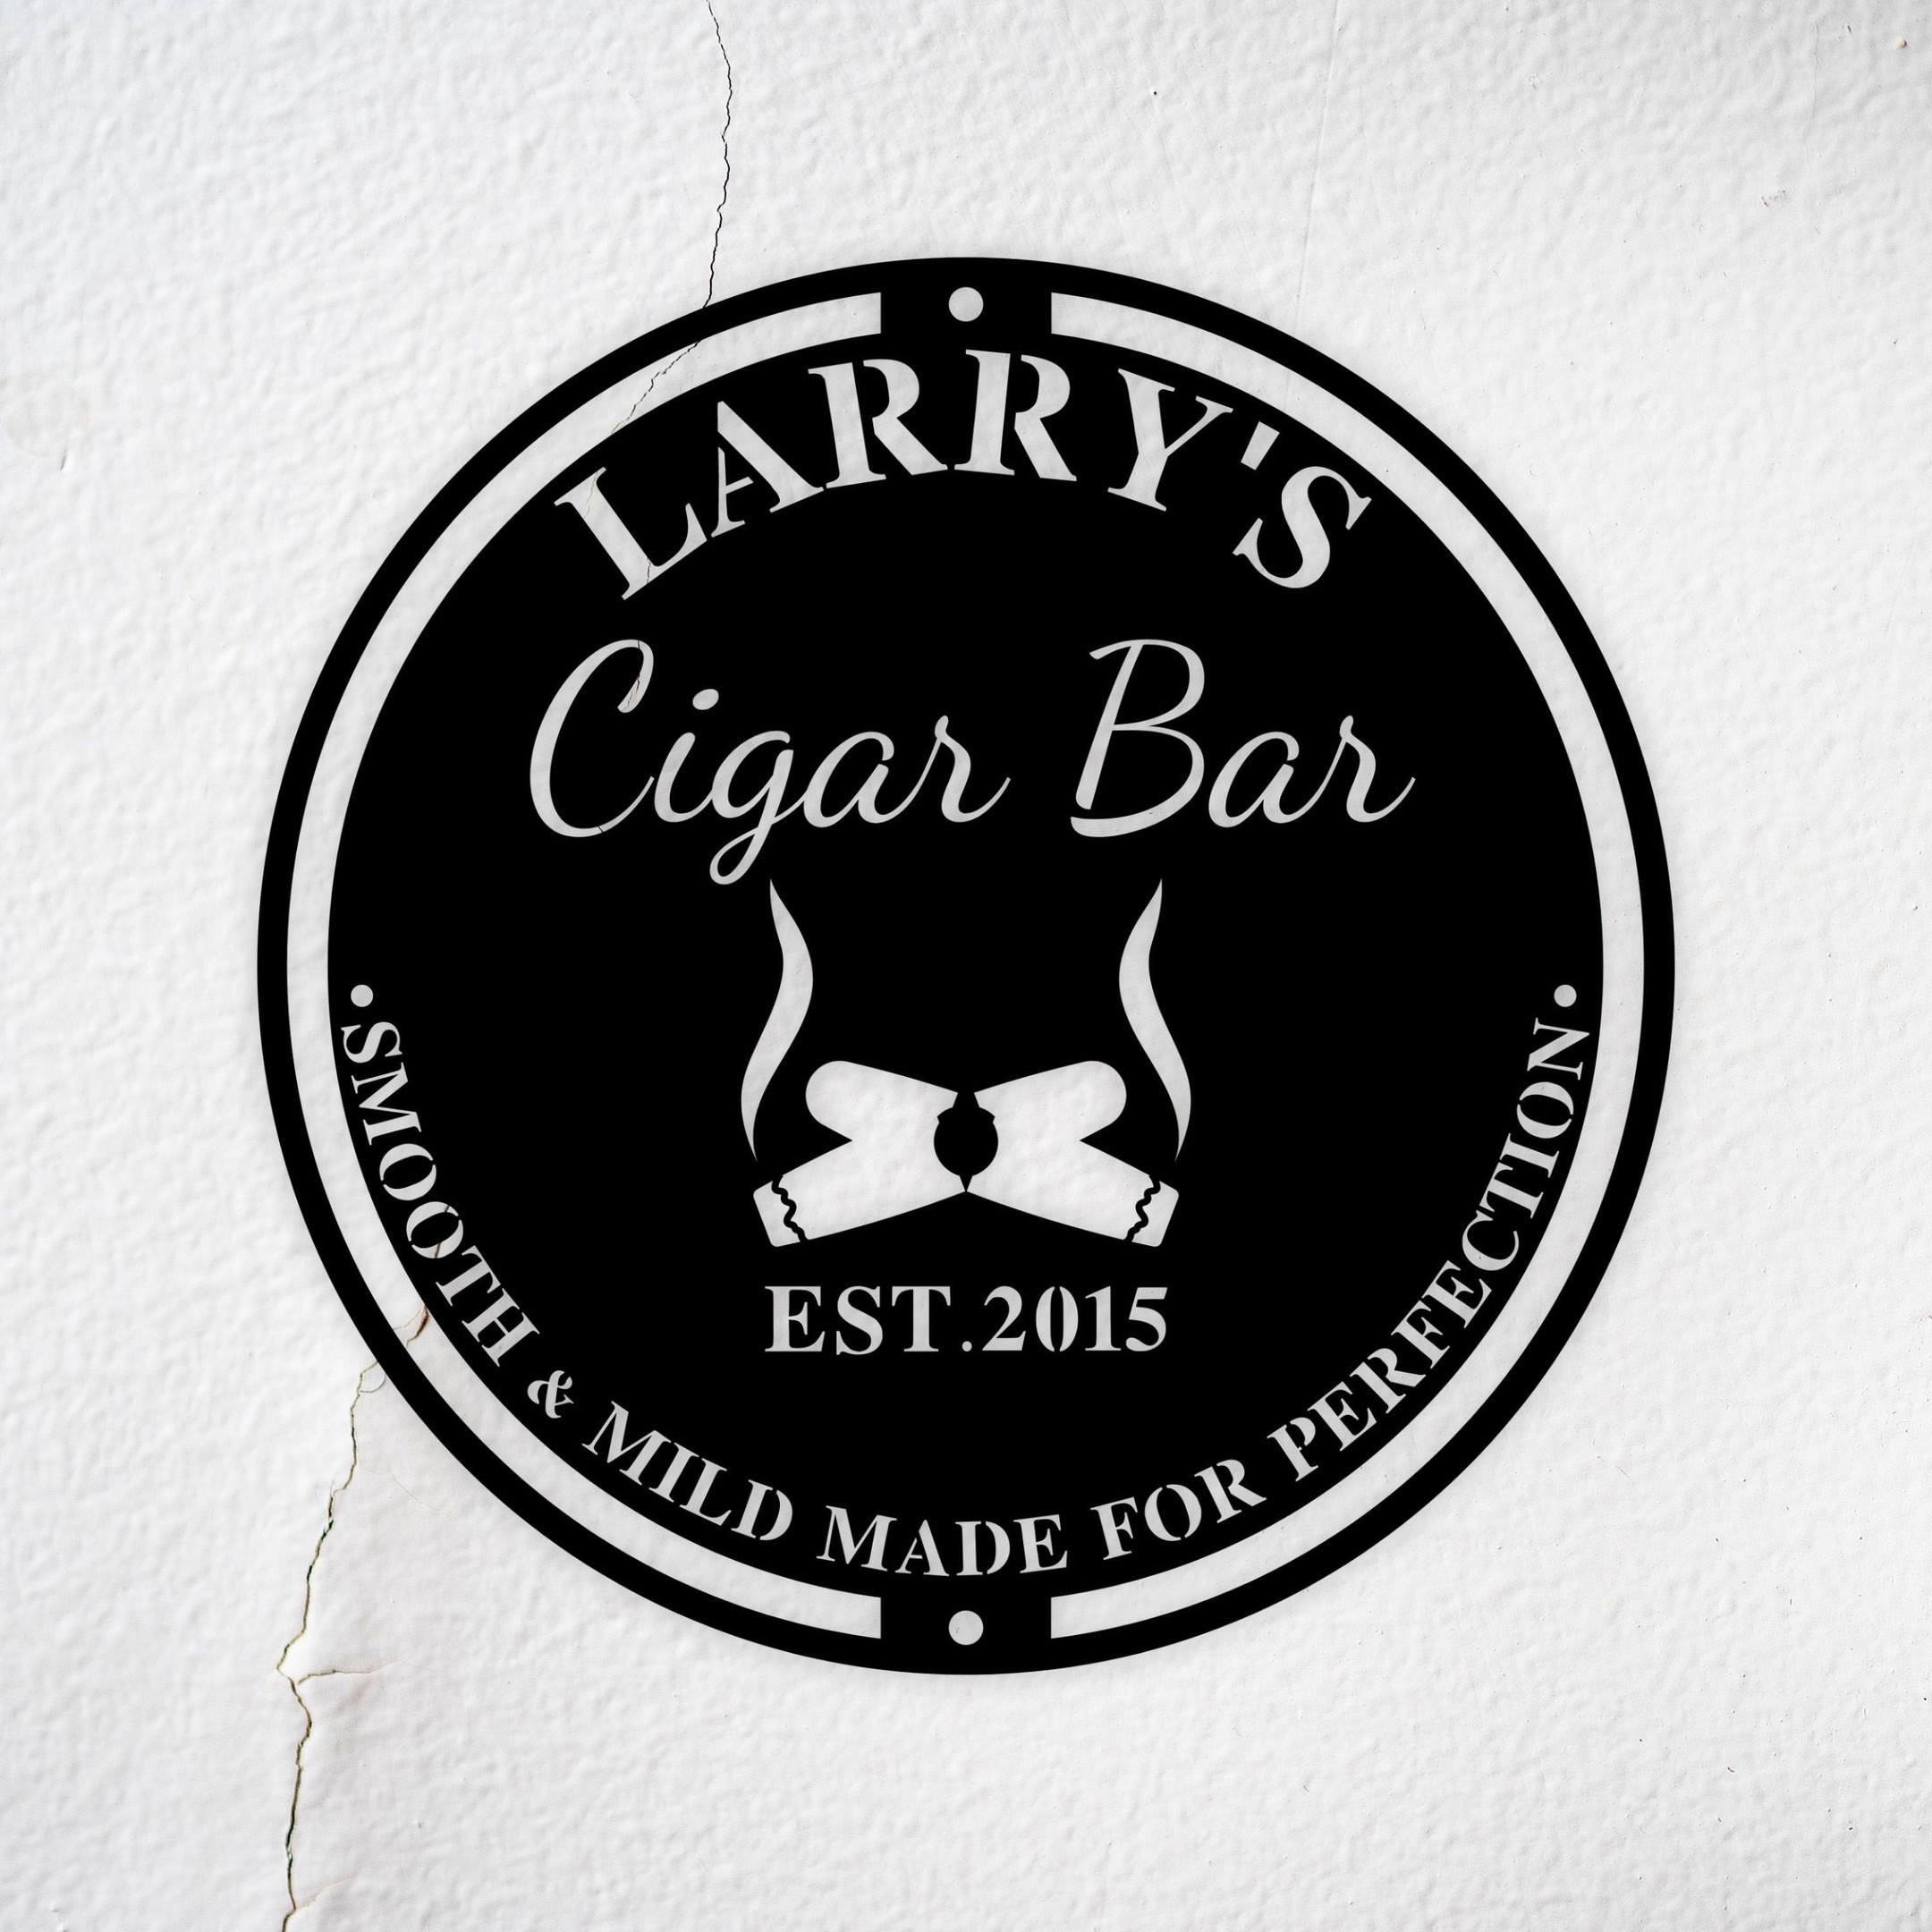 Cigar Bar Sign, Bar Signs, Cigars, Personalized Signs, Custom Bar Signs, Man Cave, Father's Day Gift, Cigar Sign, Cigar Decor, Gifts For Men, Laser Cut Metal Signs Custom Gift Ideas 12x12IN